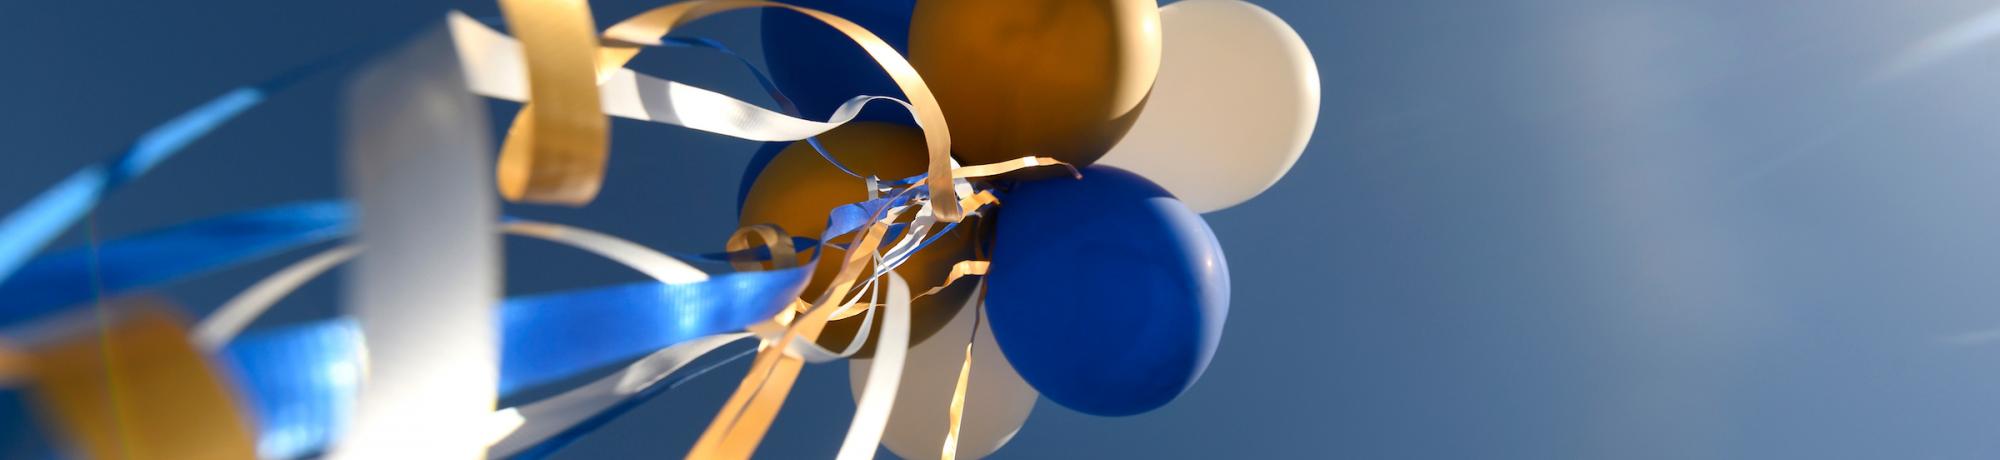 Blue and Gold balloons